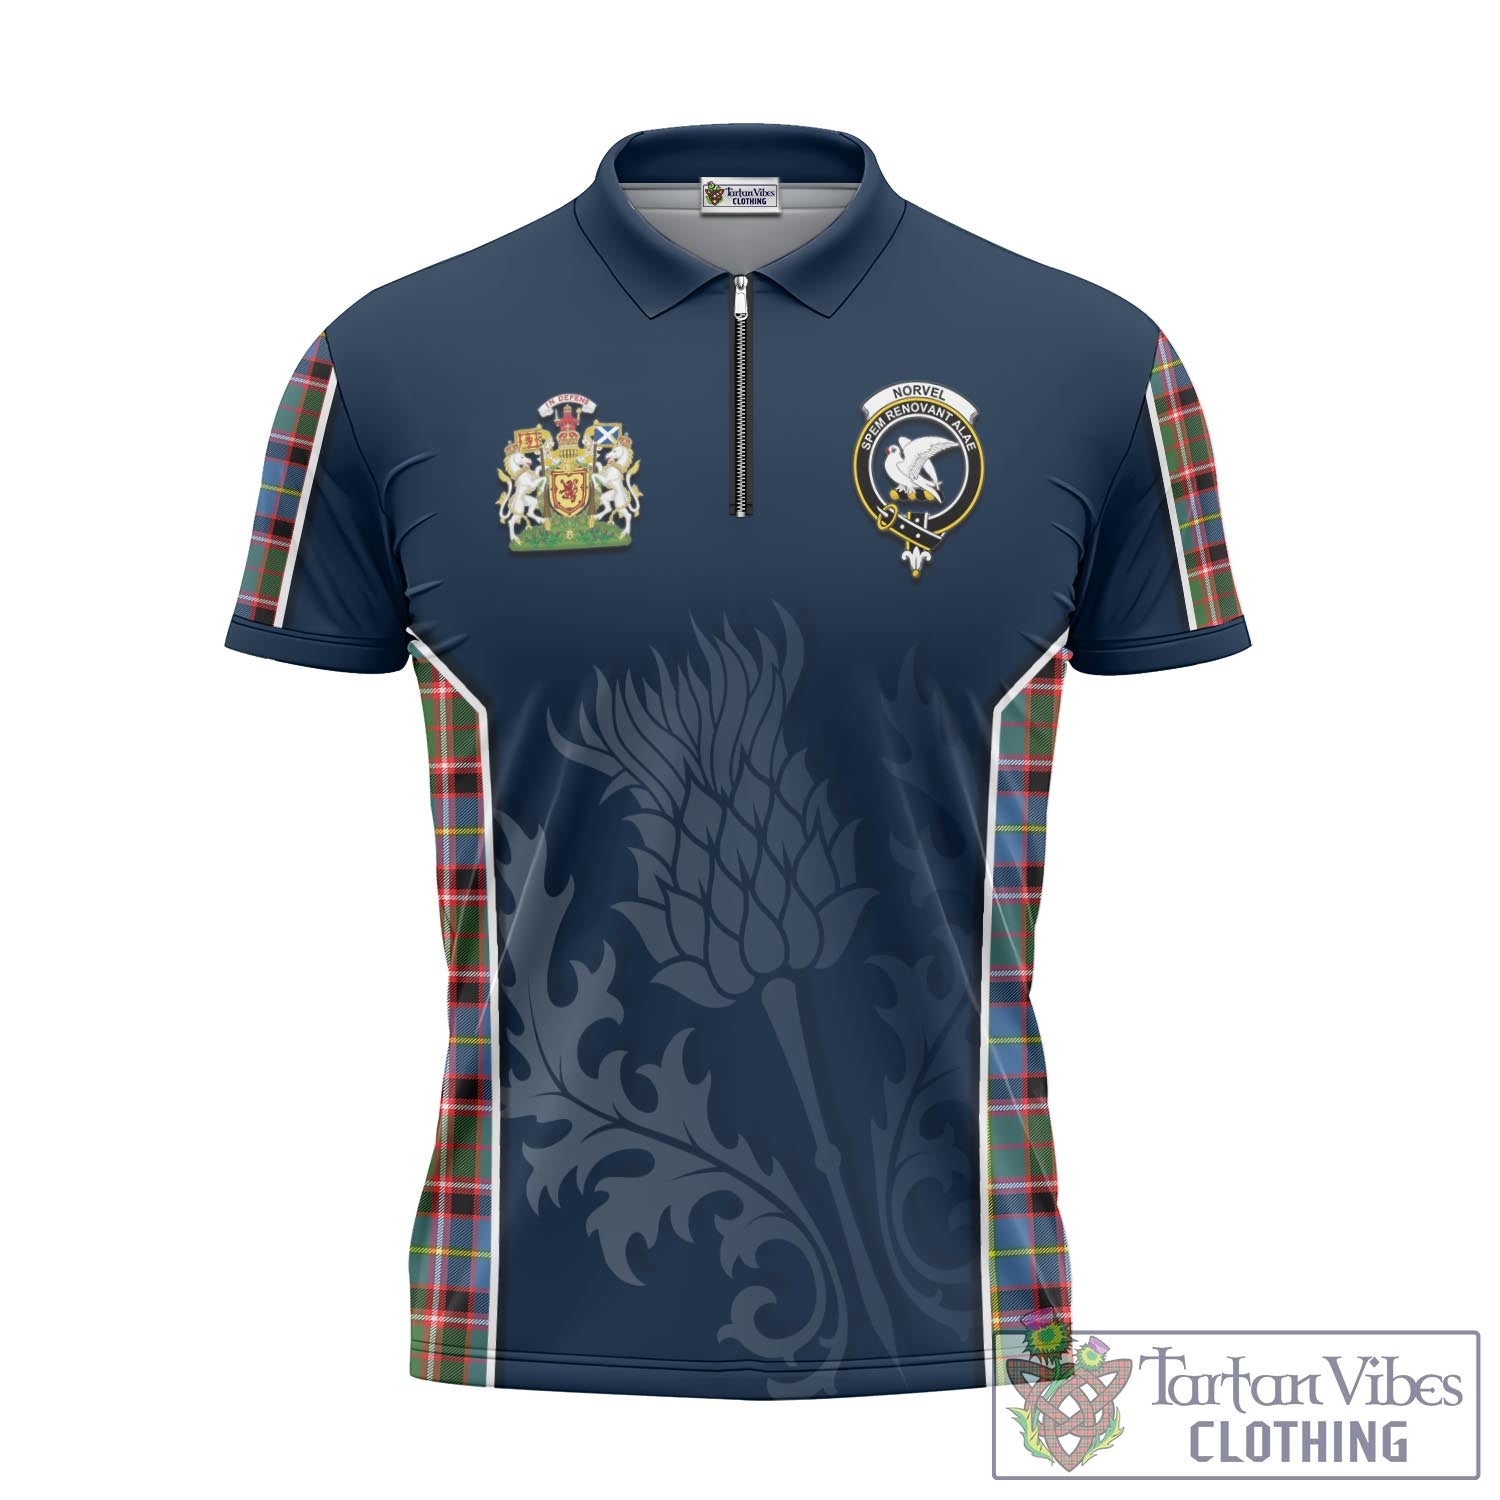 Tartan Vibes Clothing Norvel Tartan Zipper Polo Shirt with Family Crest and Scottish Thistle Vibes Sport Style